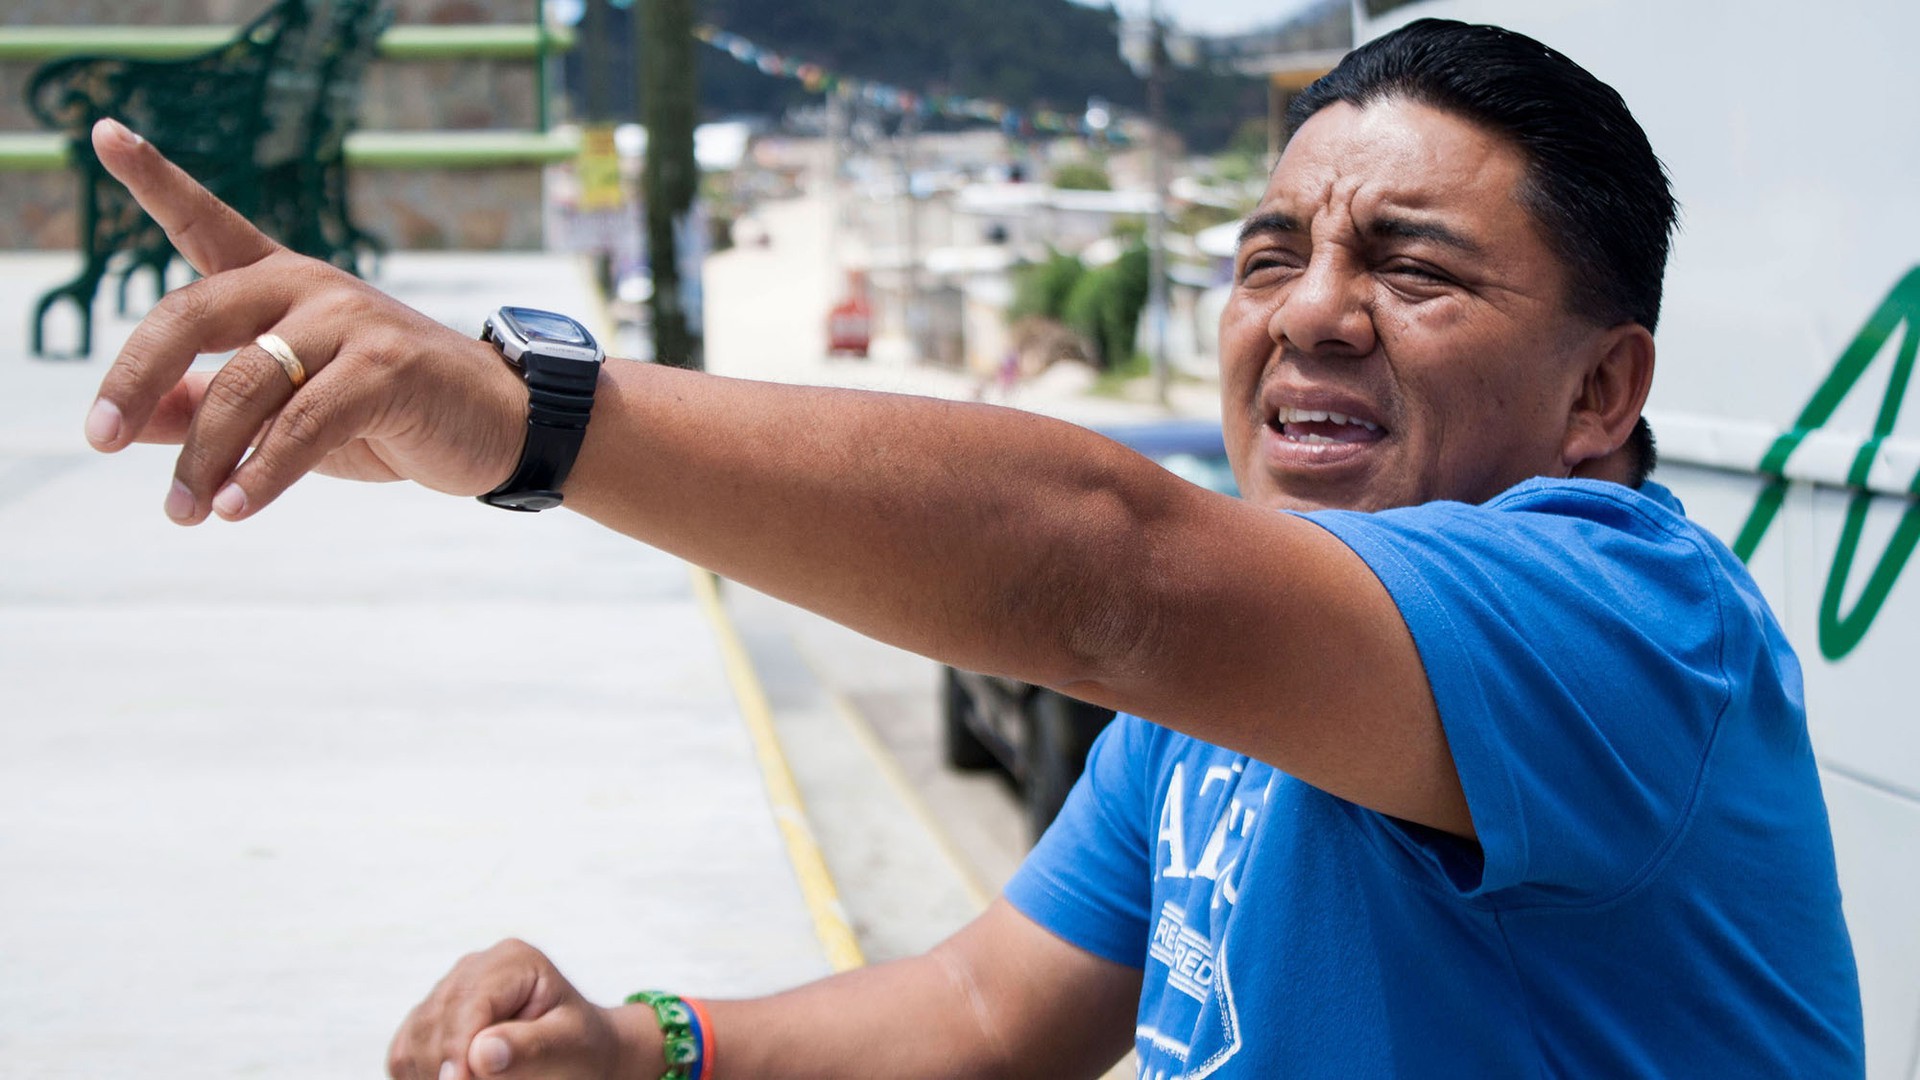 Juan de la Cruz points out the basketball courts in the highland town of Zinacantán, Chiapas, Mex., explaining how they've become a natural part of everyday life. (Photo by Jessie Wardarski.)